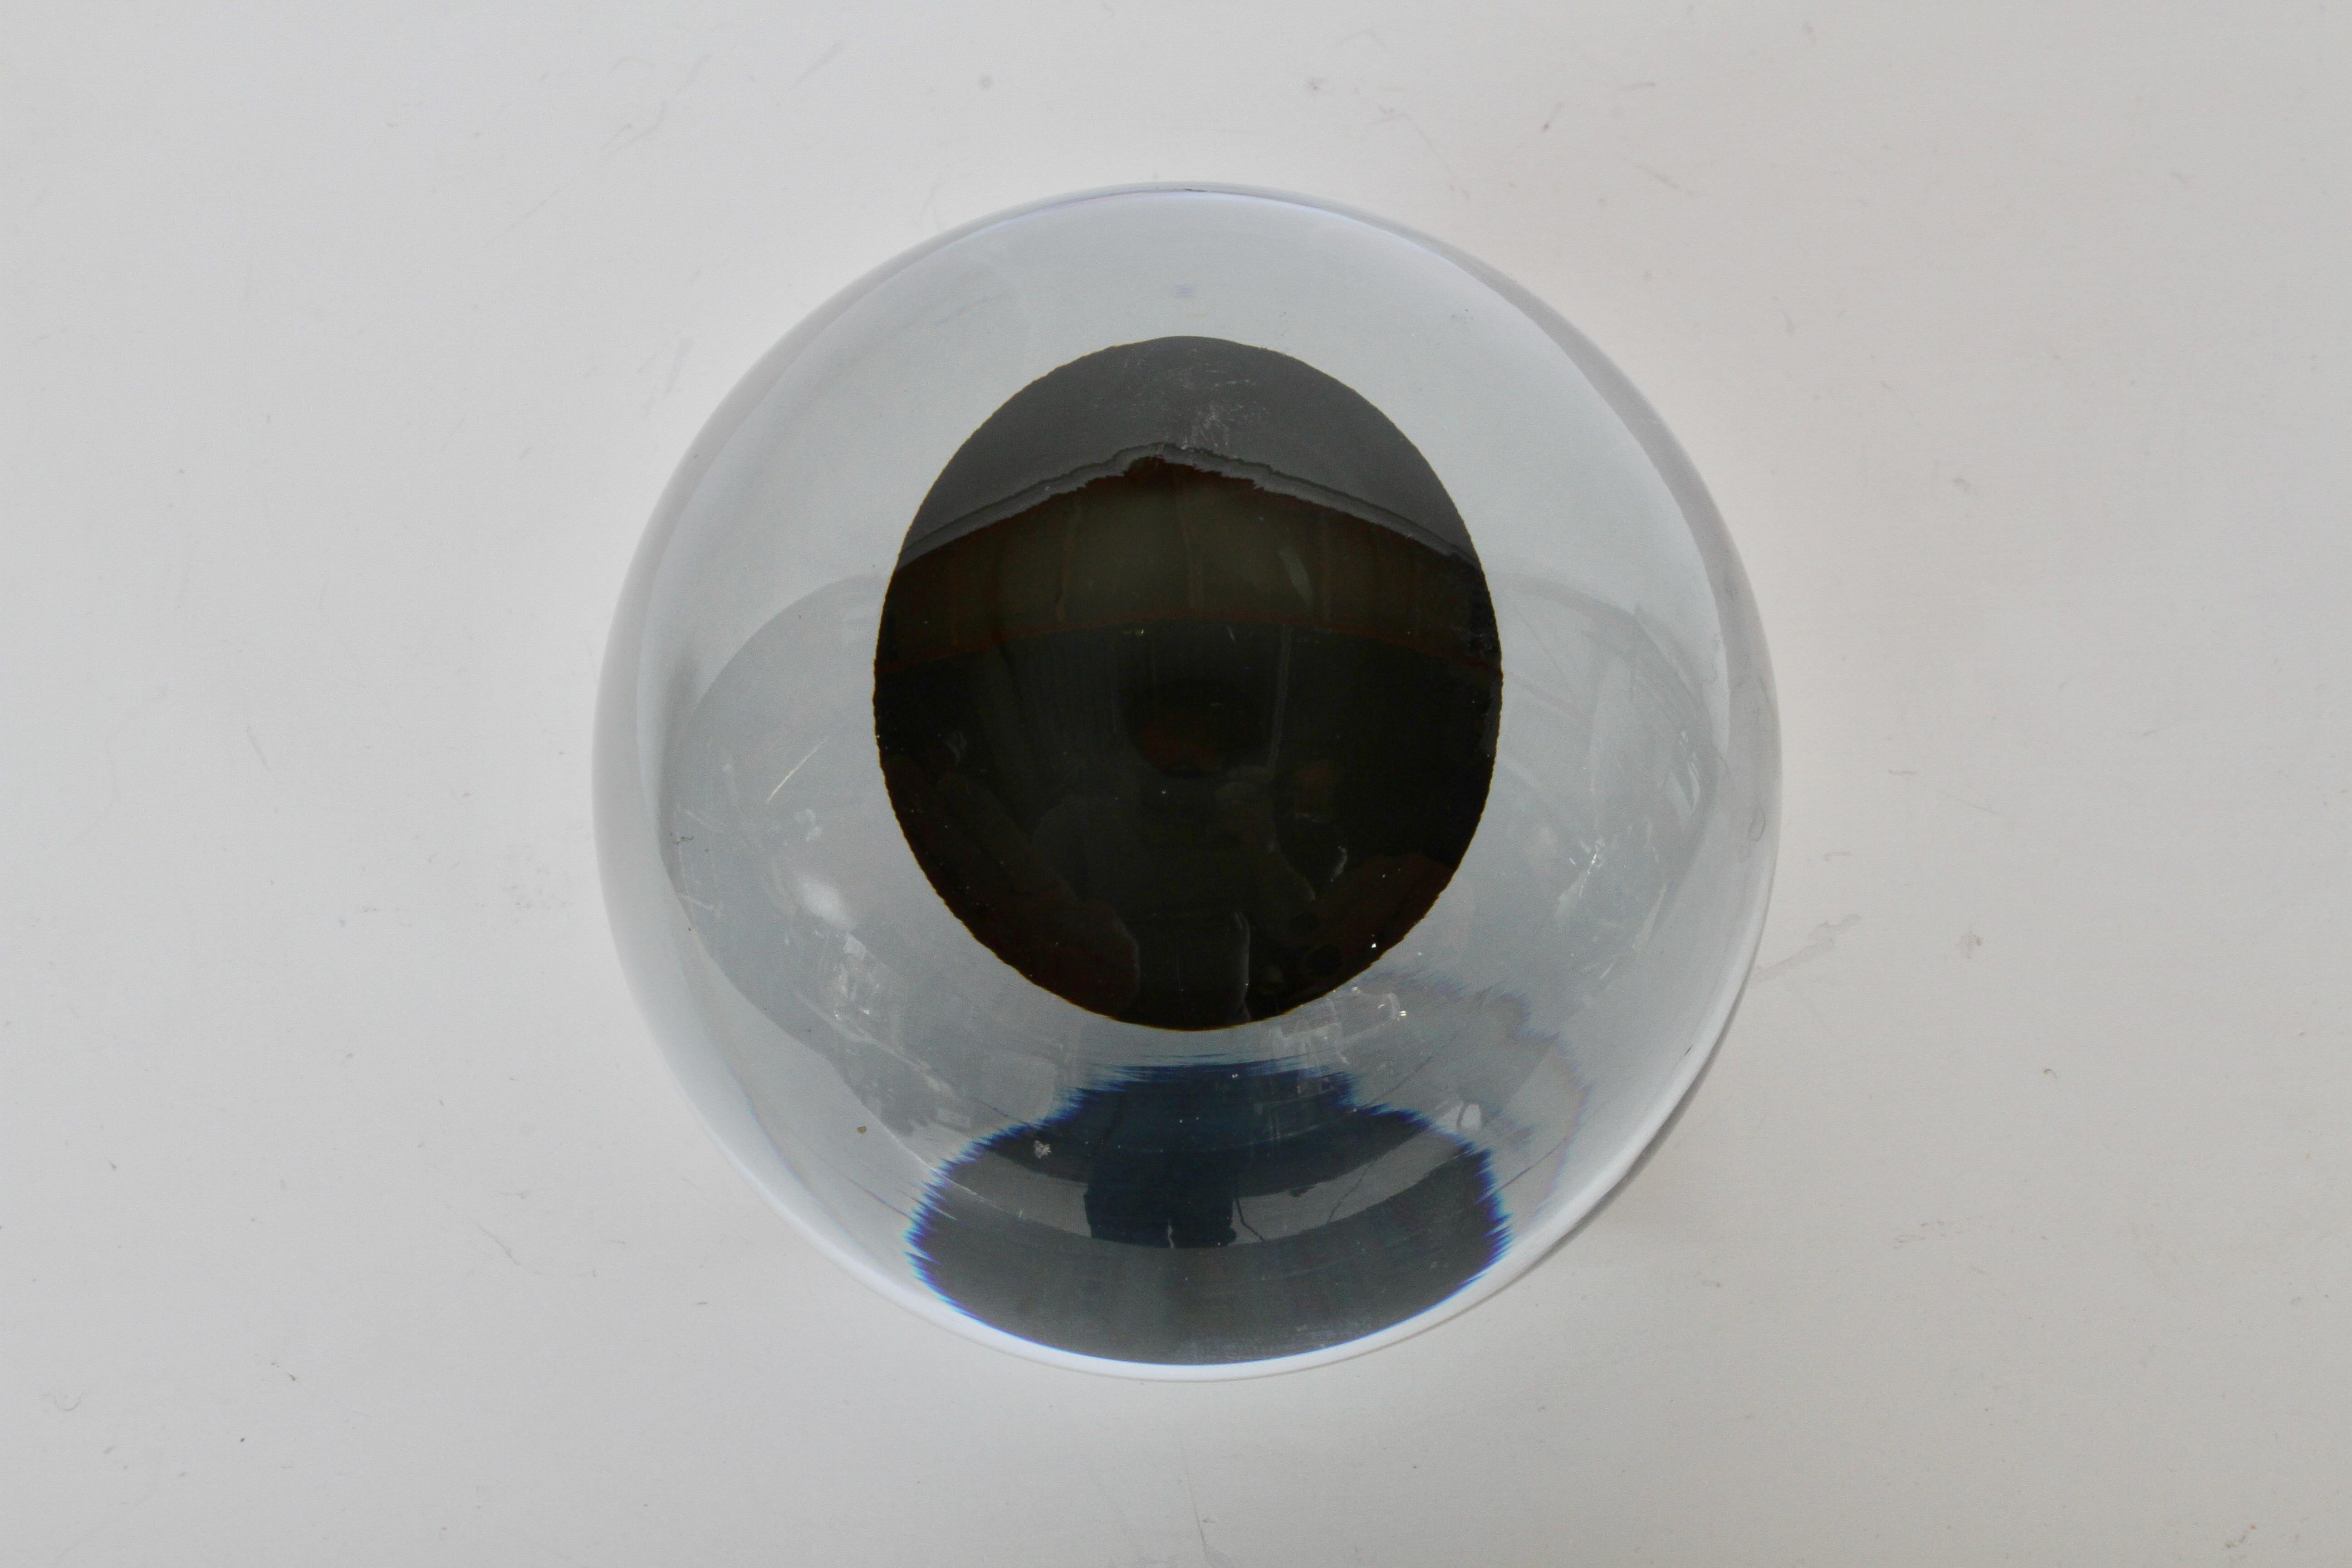 Strombergshyttan, Sweden Mid-Century Modern spherical glass orb paperweight, internally decorated with black glass 1960s. Light scratches. Signed Stromberg B 937.